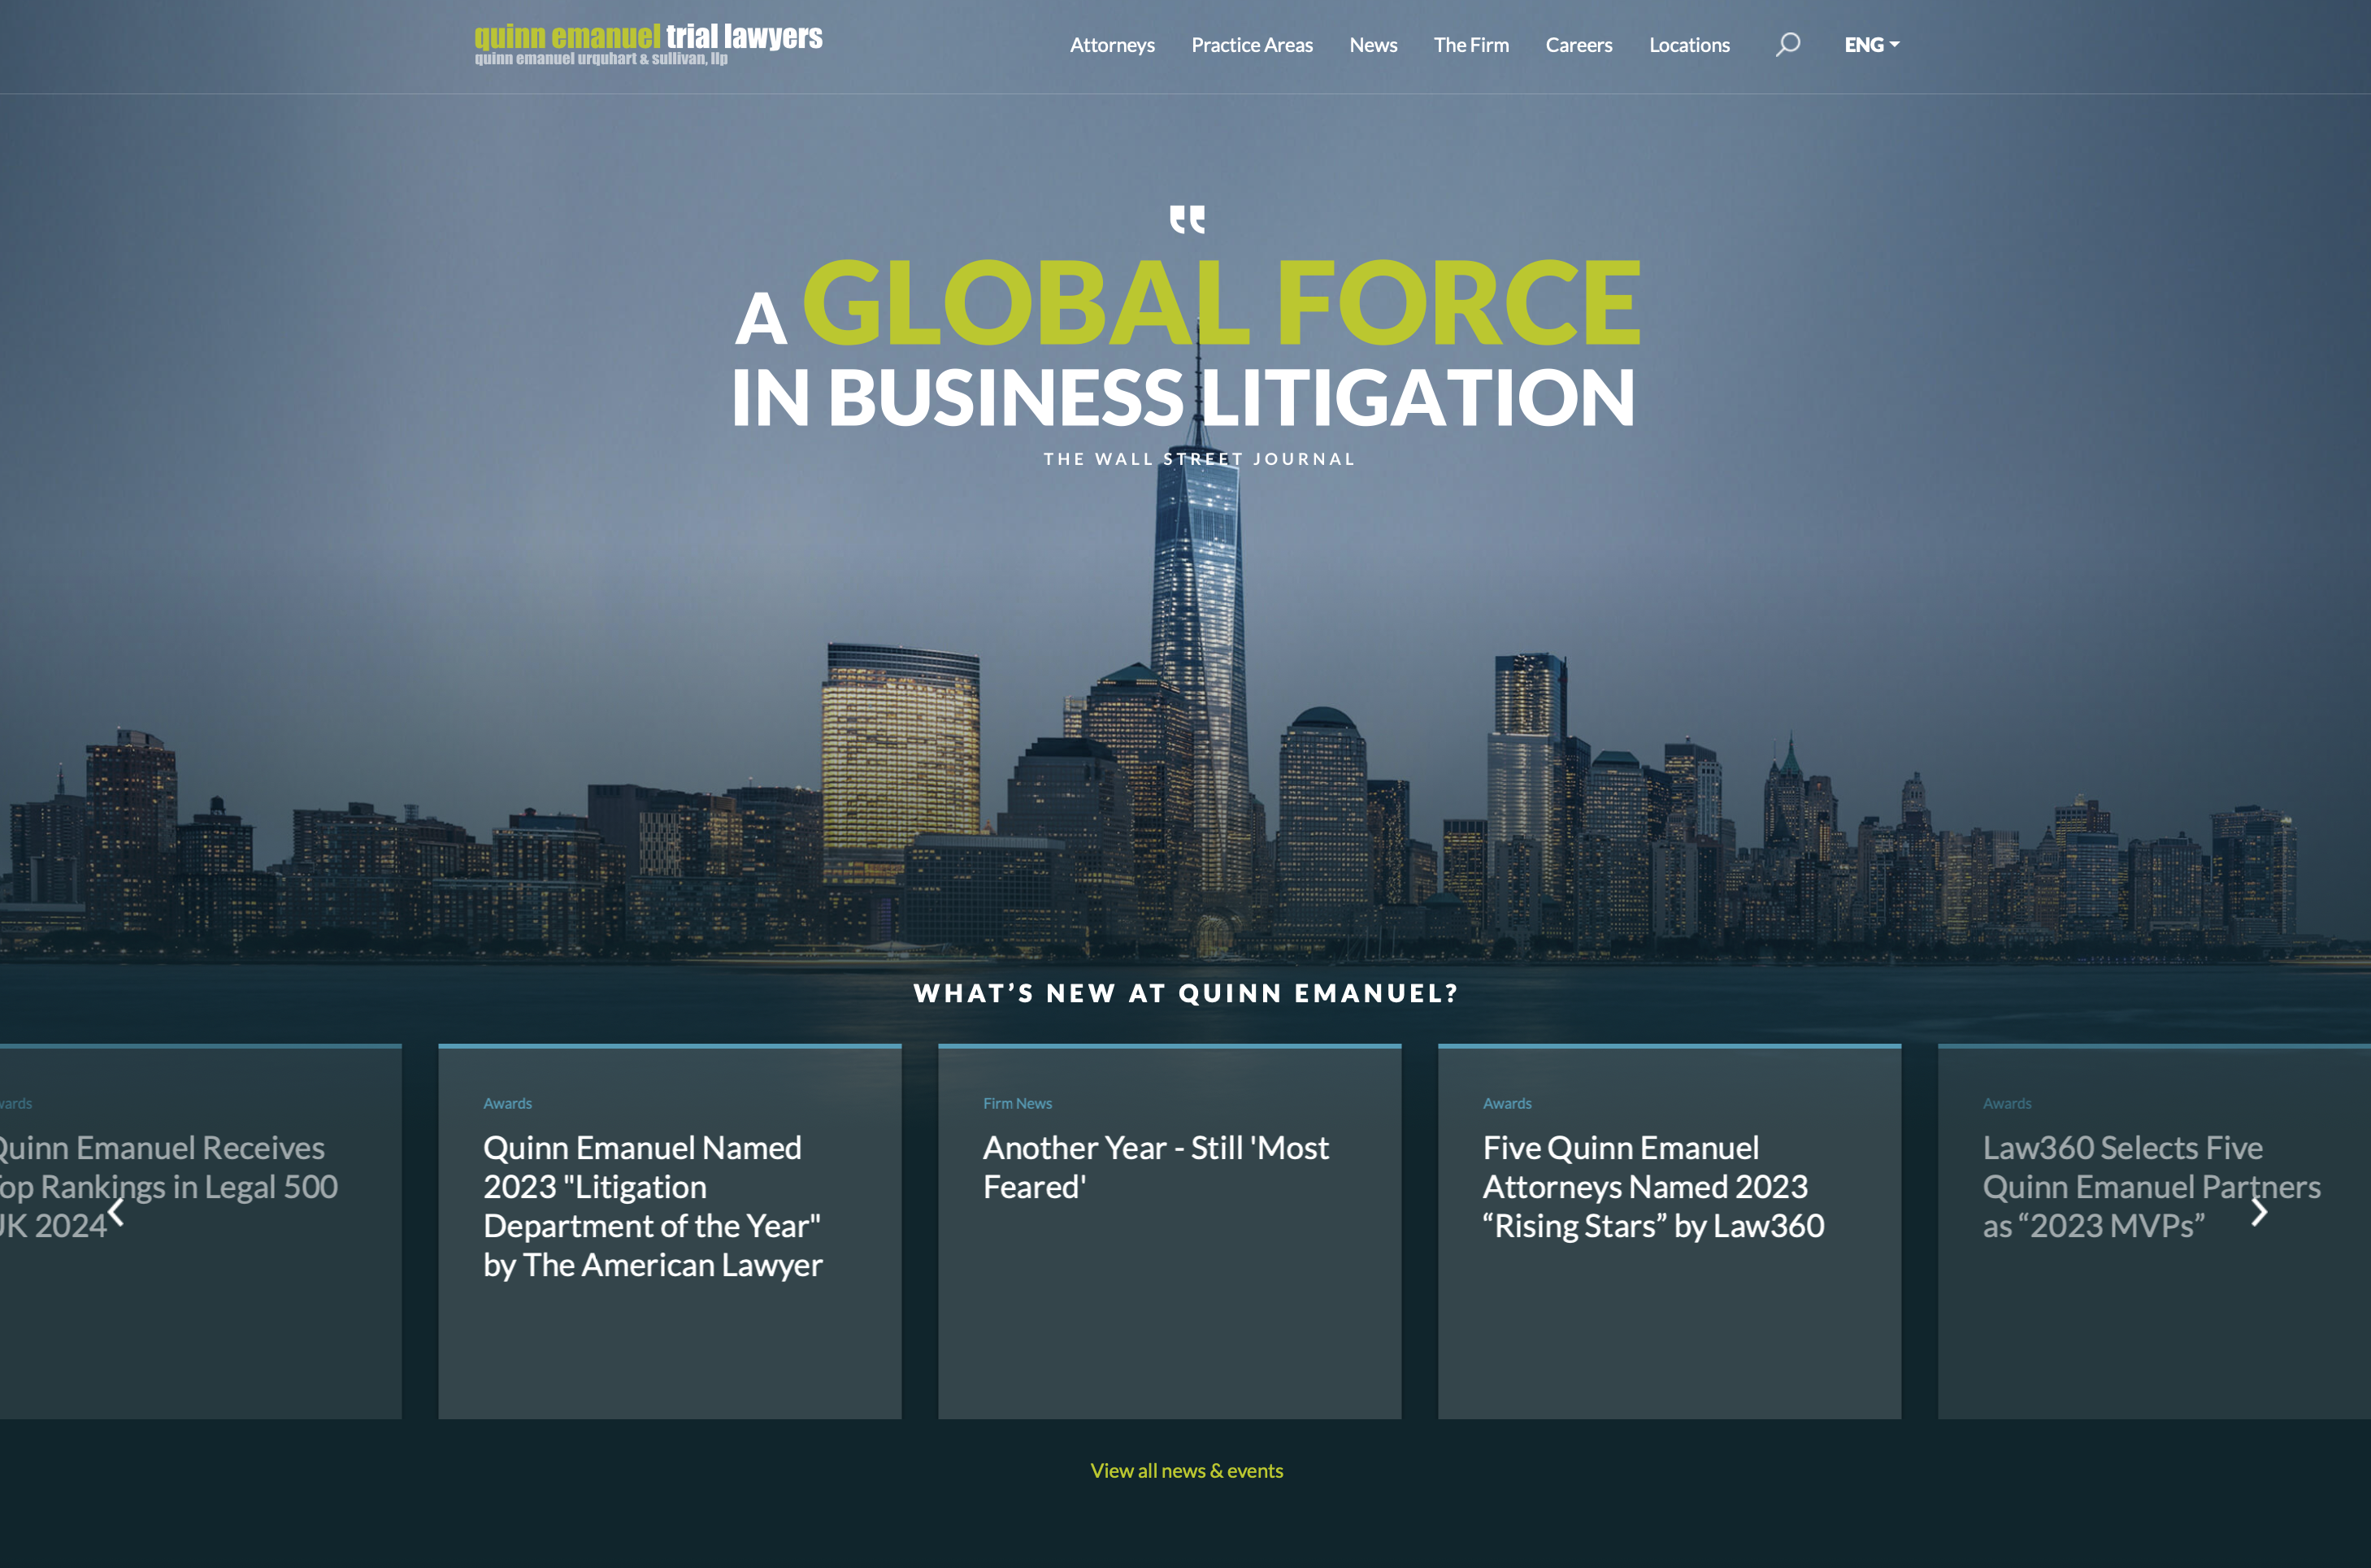 Quin Emanuel Trail Lawyers